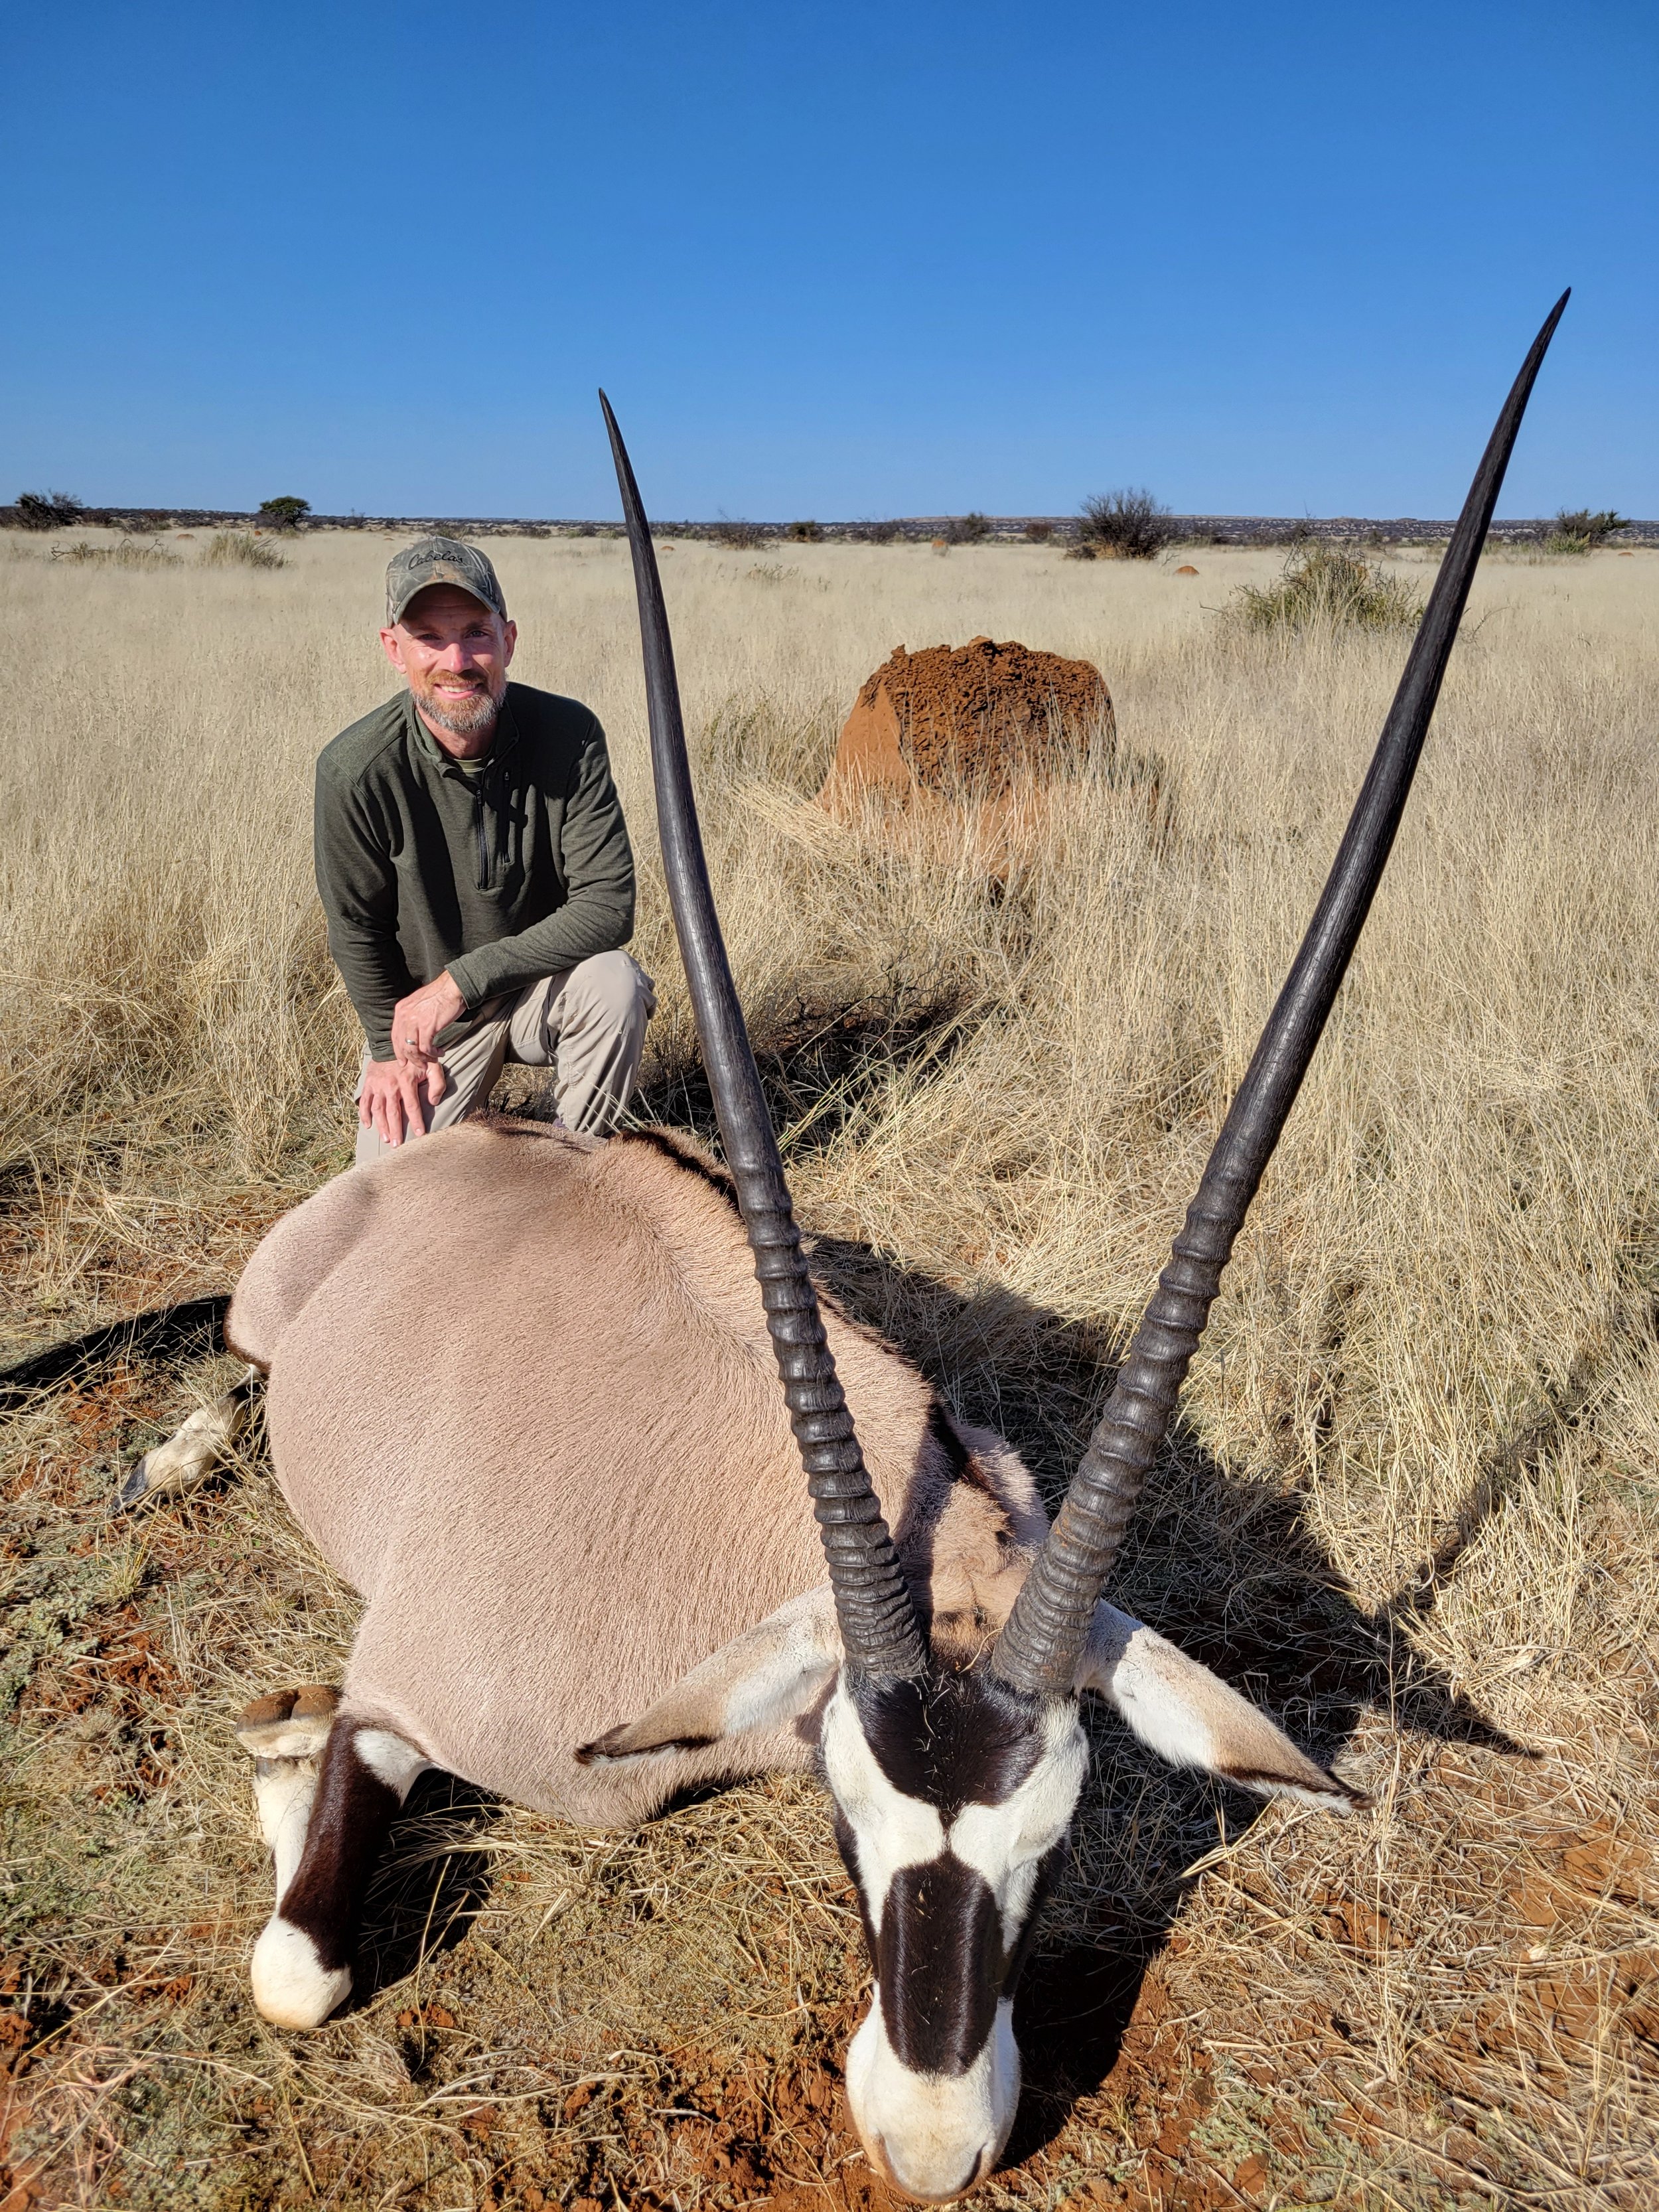 Josh with his gemsbok and ant mound in the background.jpg